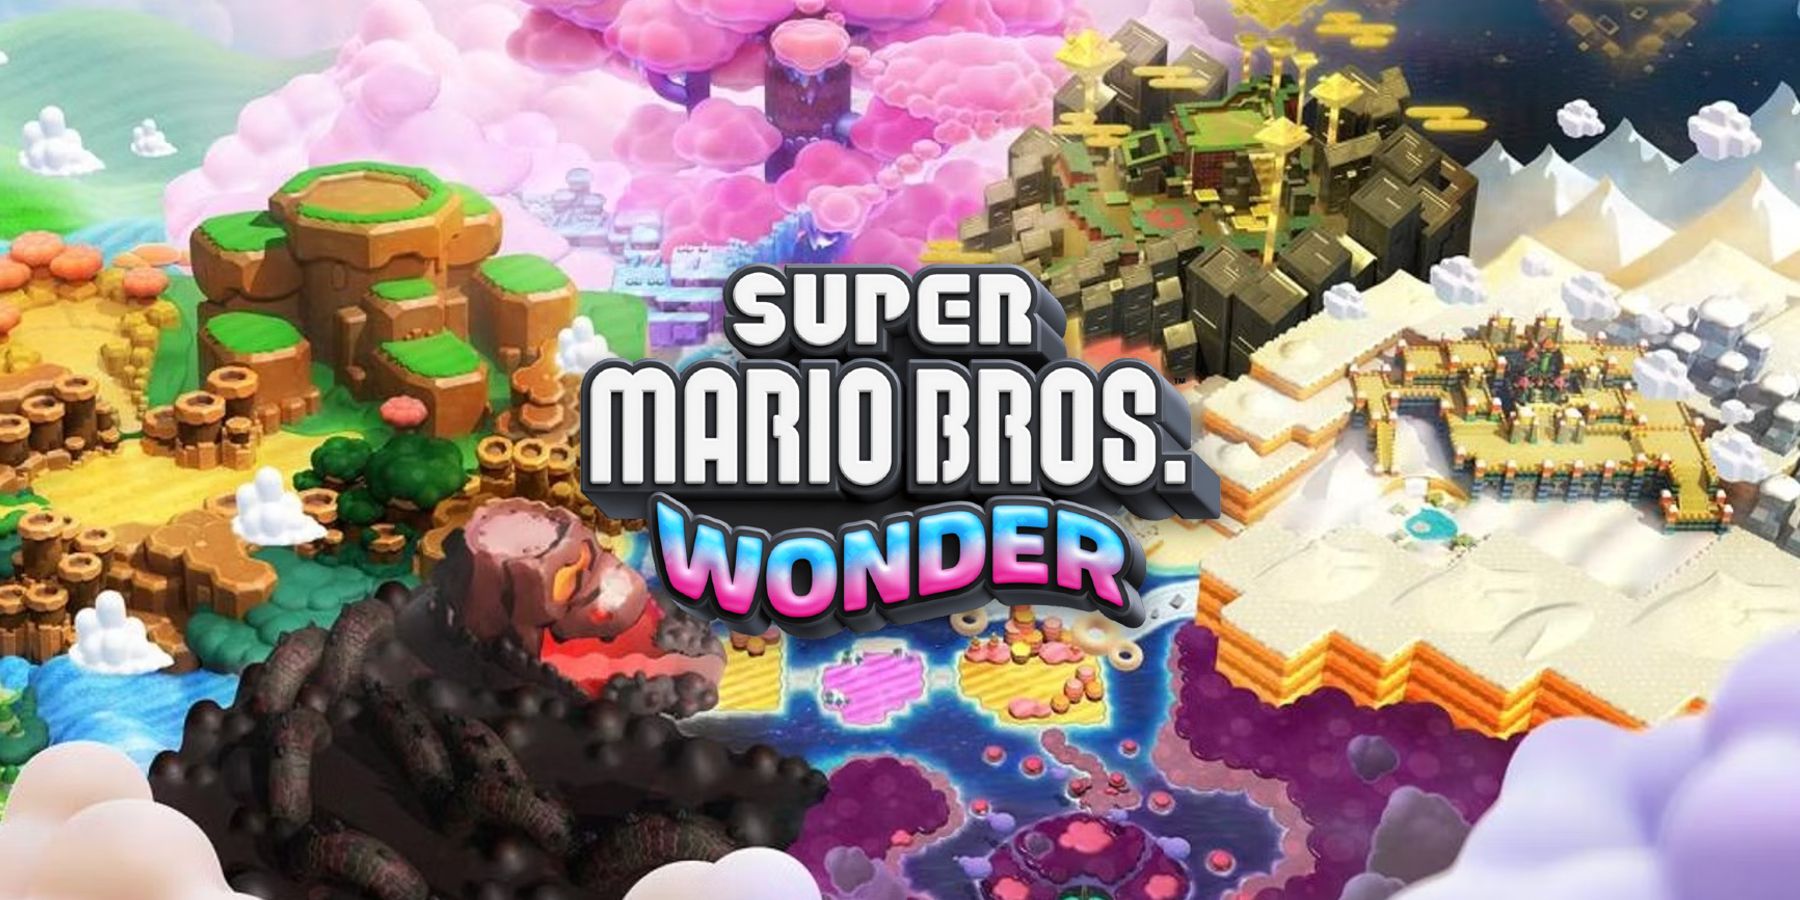 Super Mario Wonder’s Worlds Stick Too Closely to the Formula